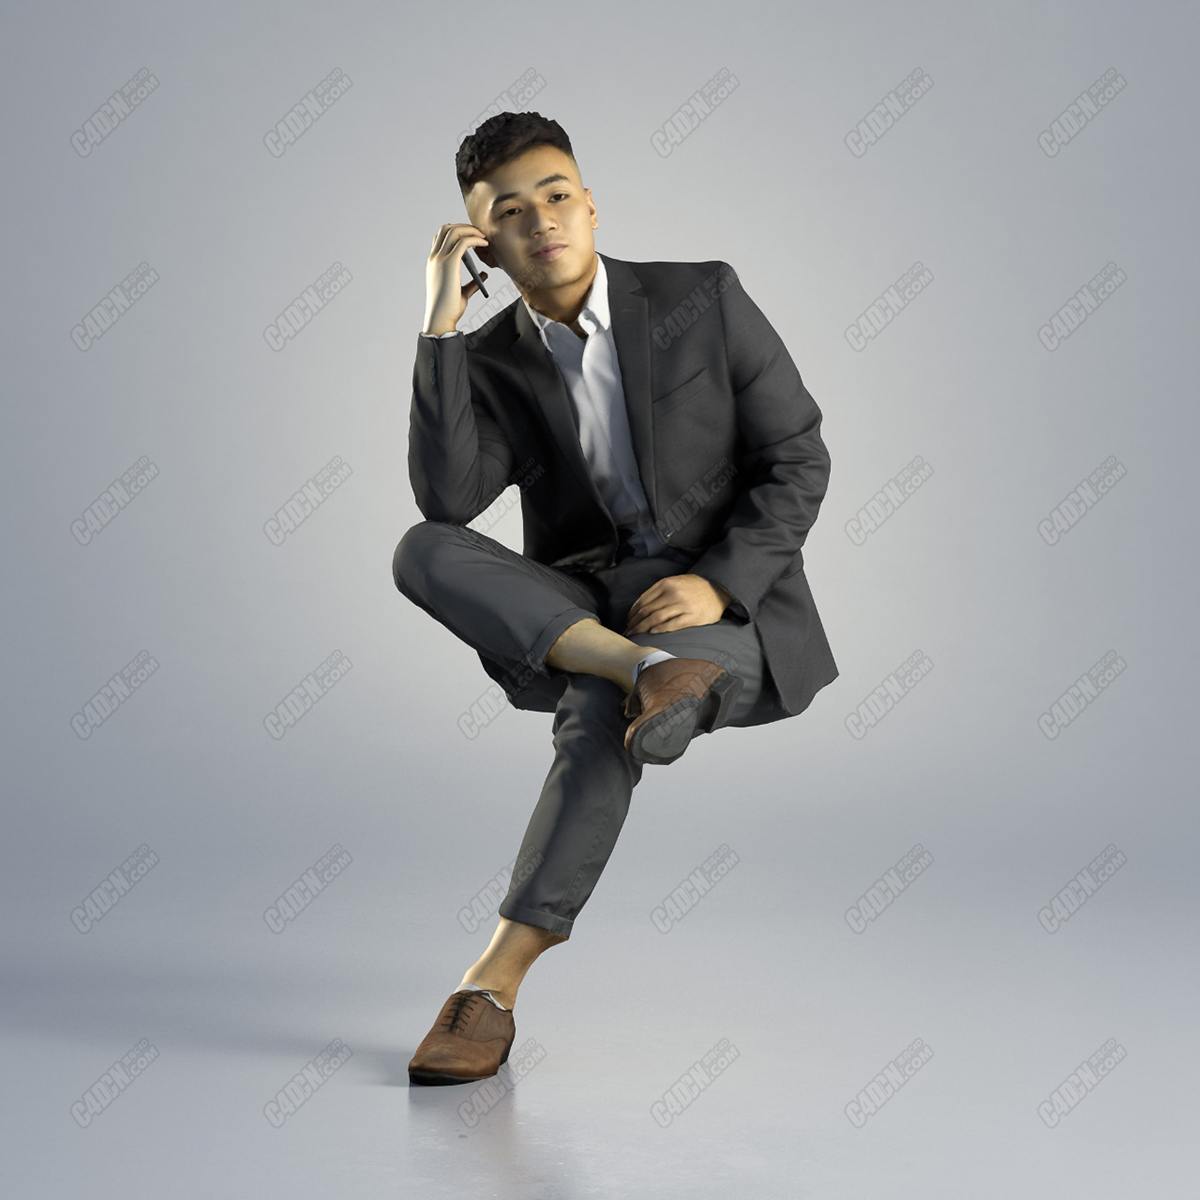 Kevin_Business_Sitting_002_Front.jpg